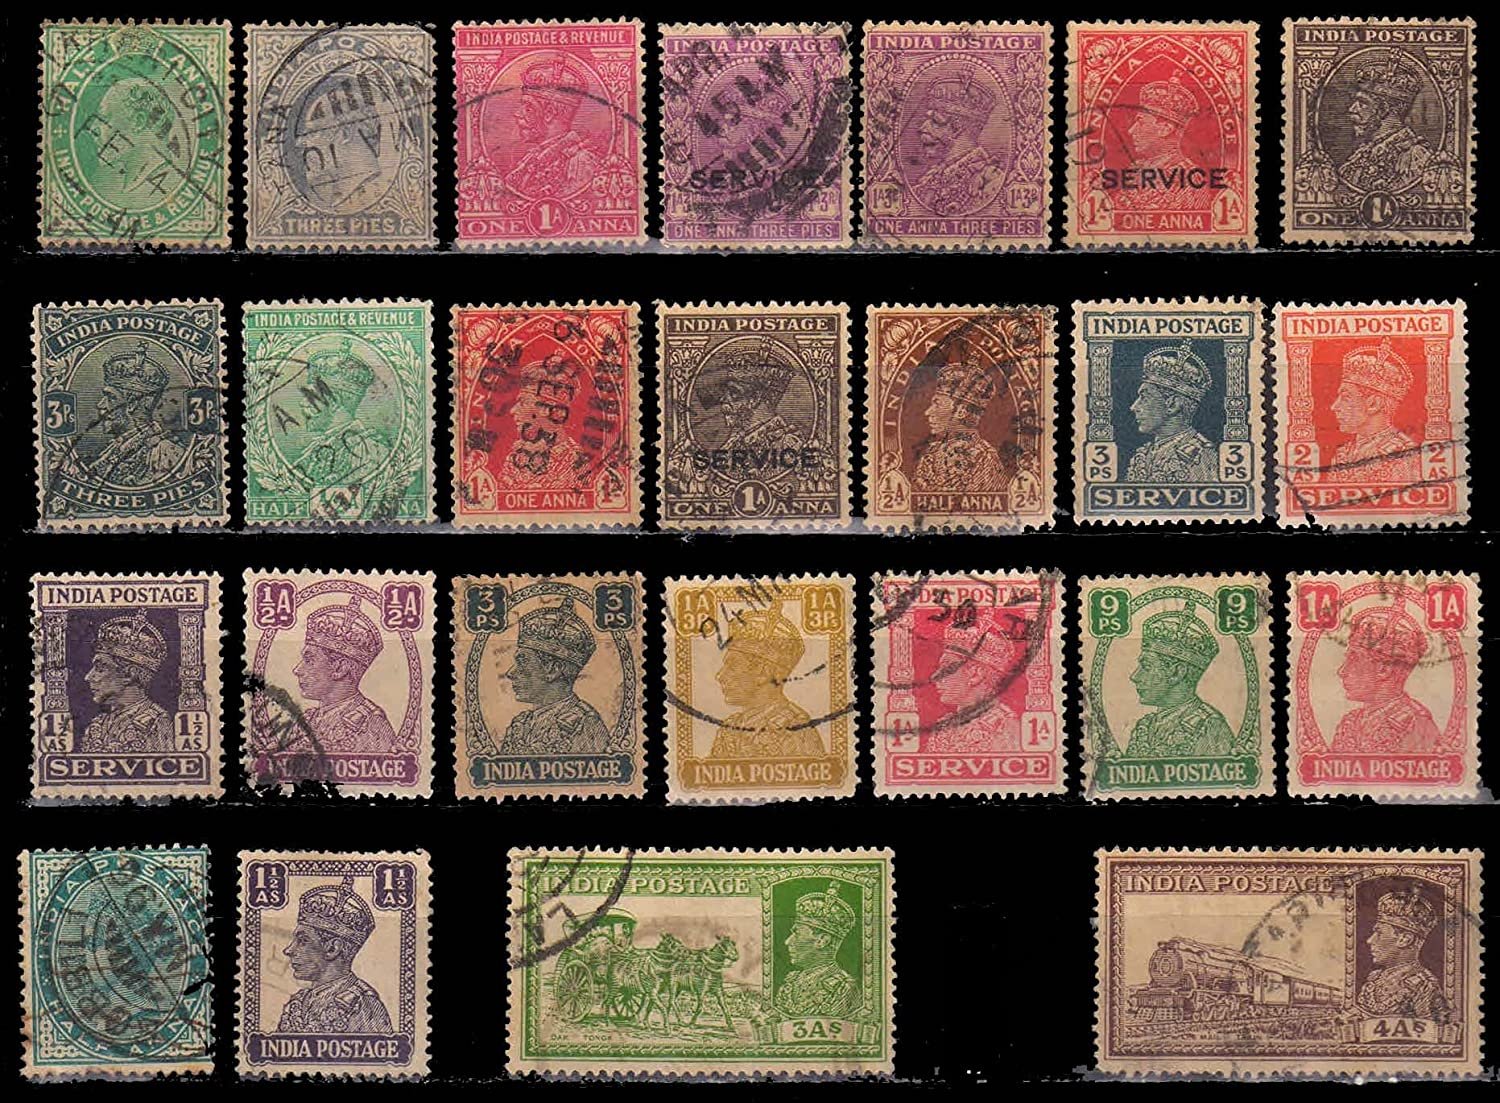 India Pre-Independence (1854-1946) Stamps